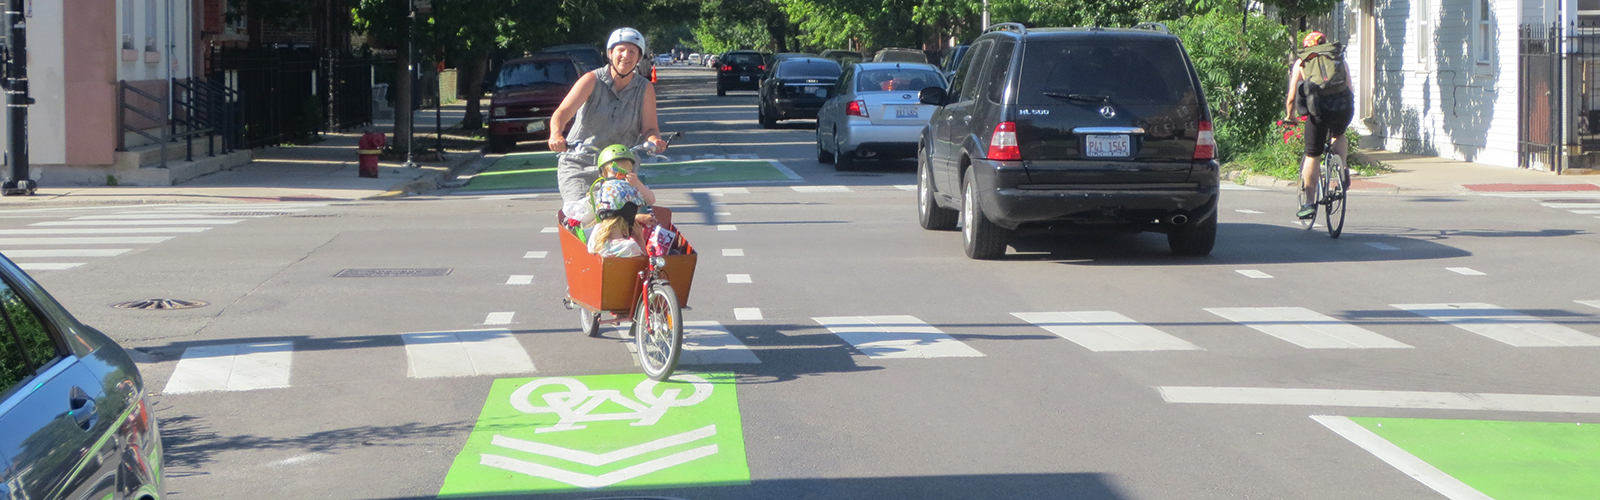 Adult riding cargo bike with children in it and green bikeway markings visible